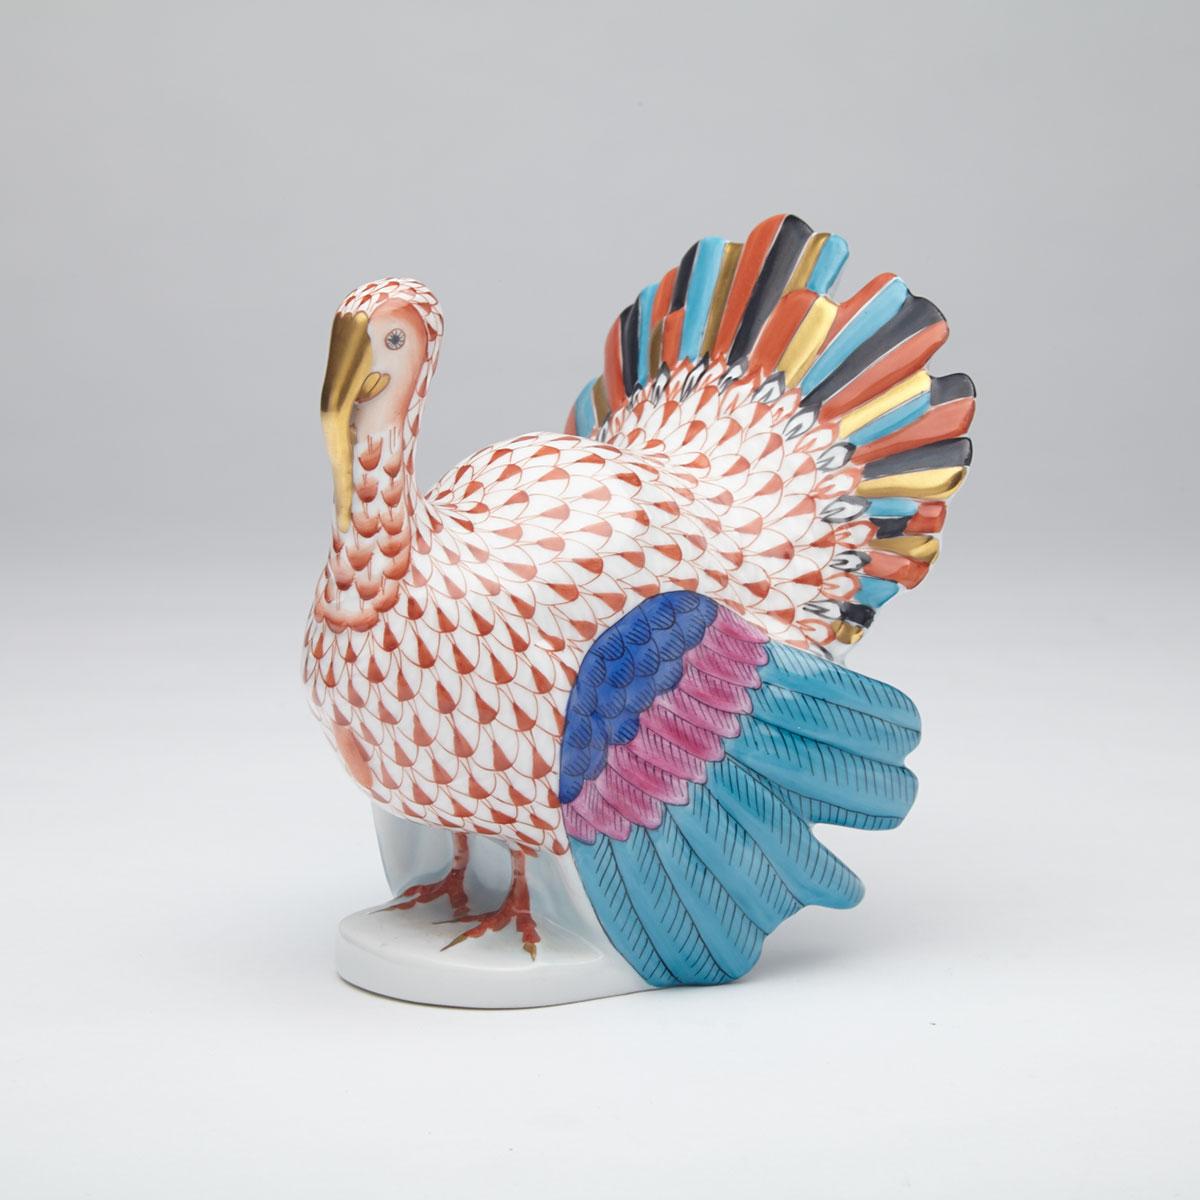 Herend Model of a Turkey, 20th century